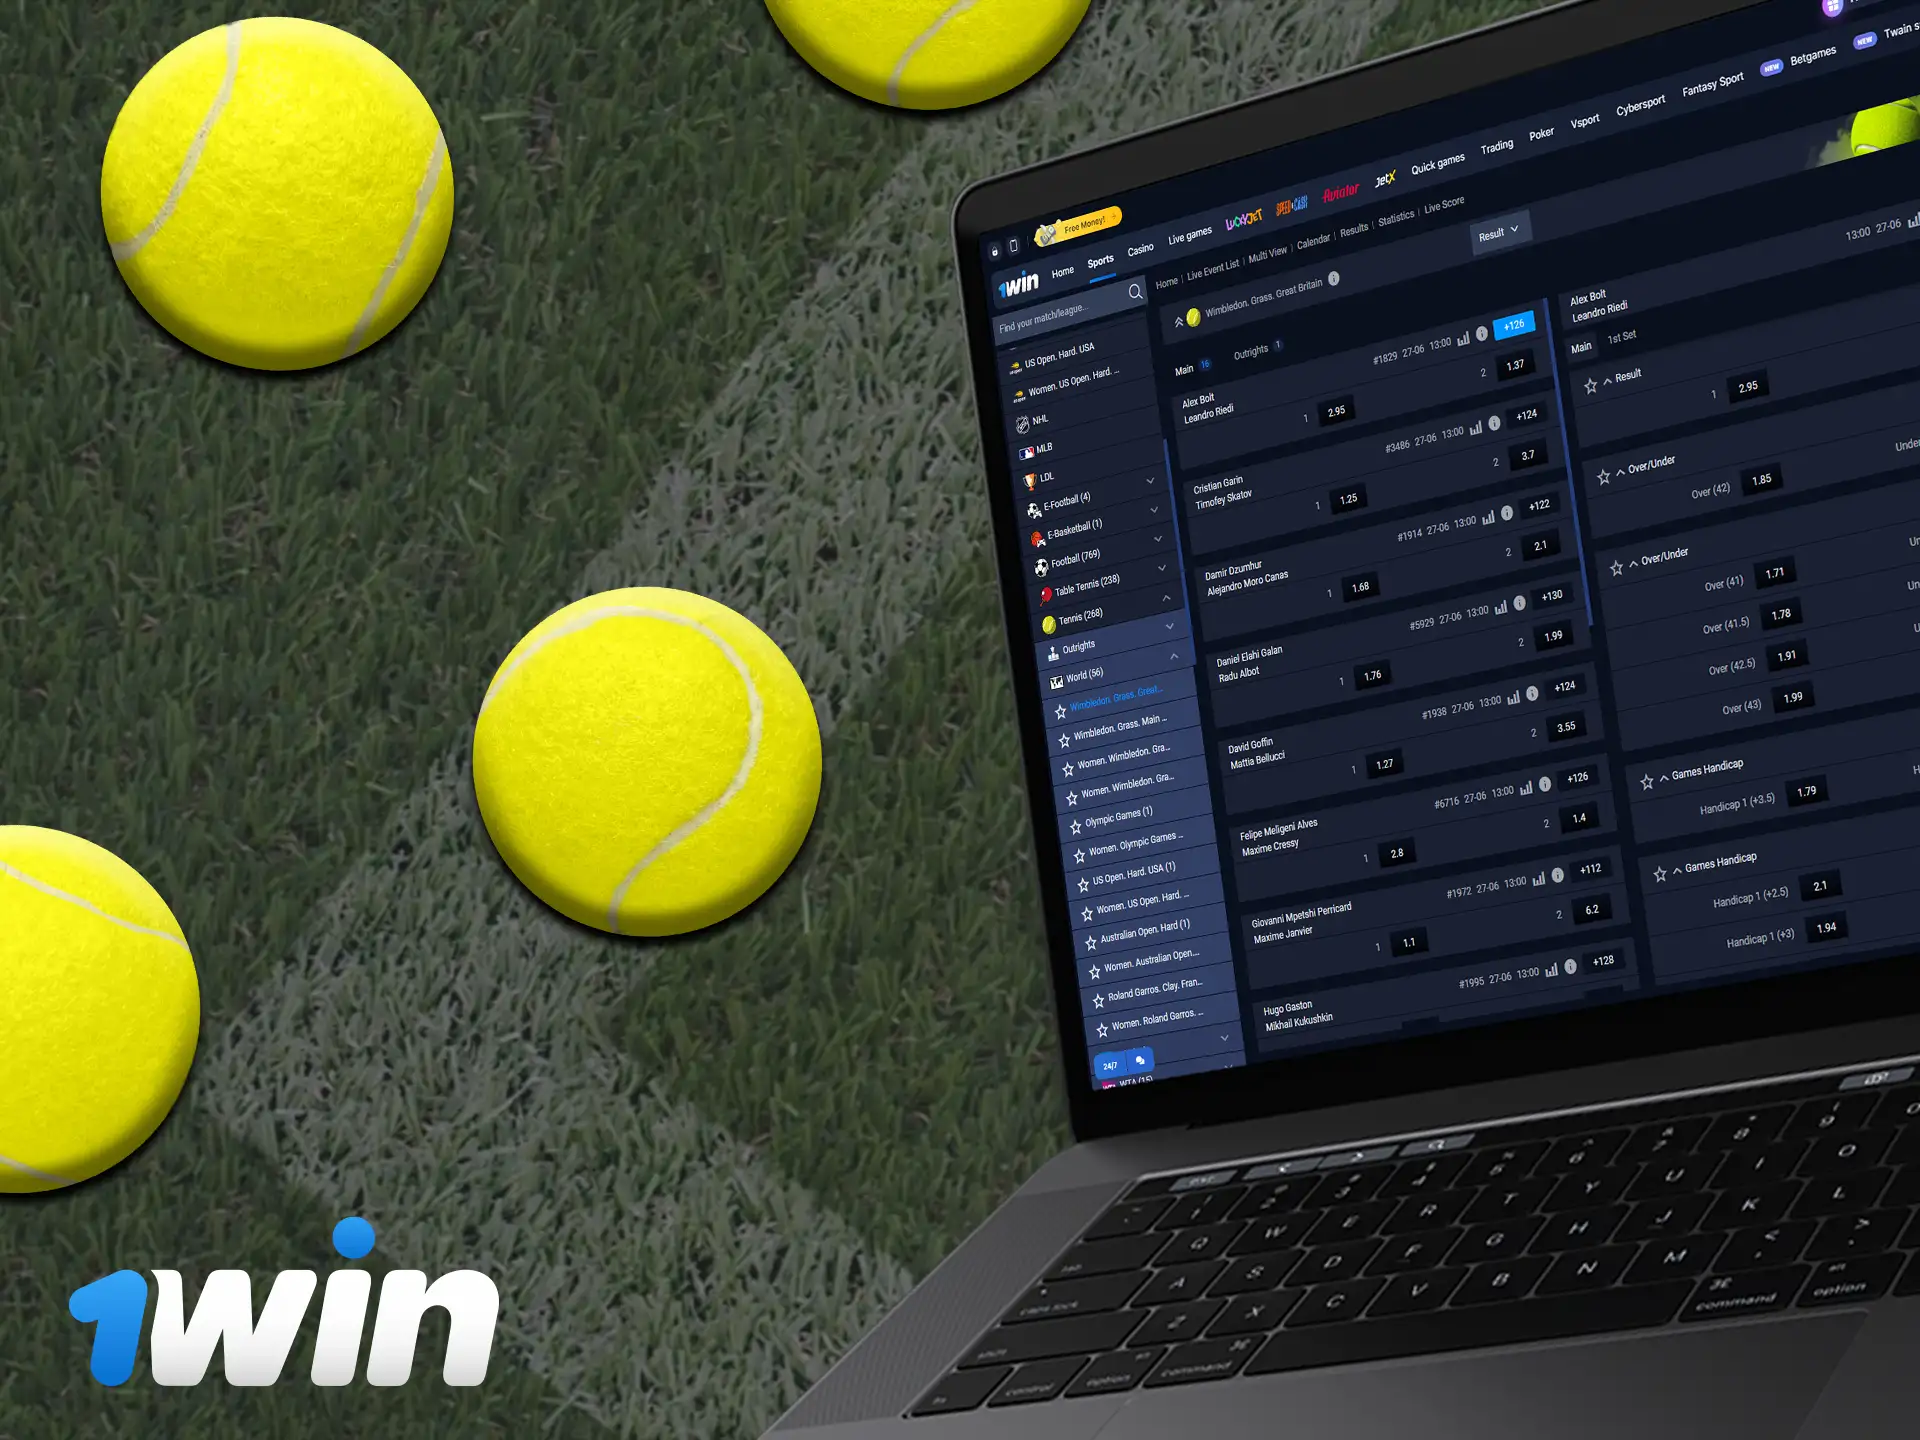 1Win is your betting option for Tennis.